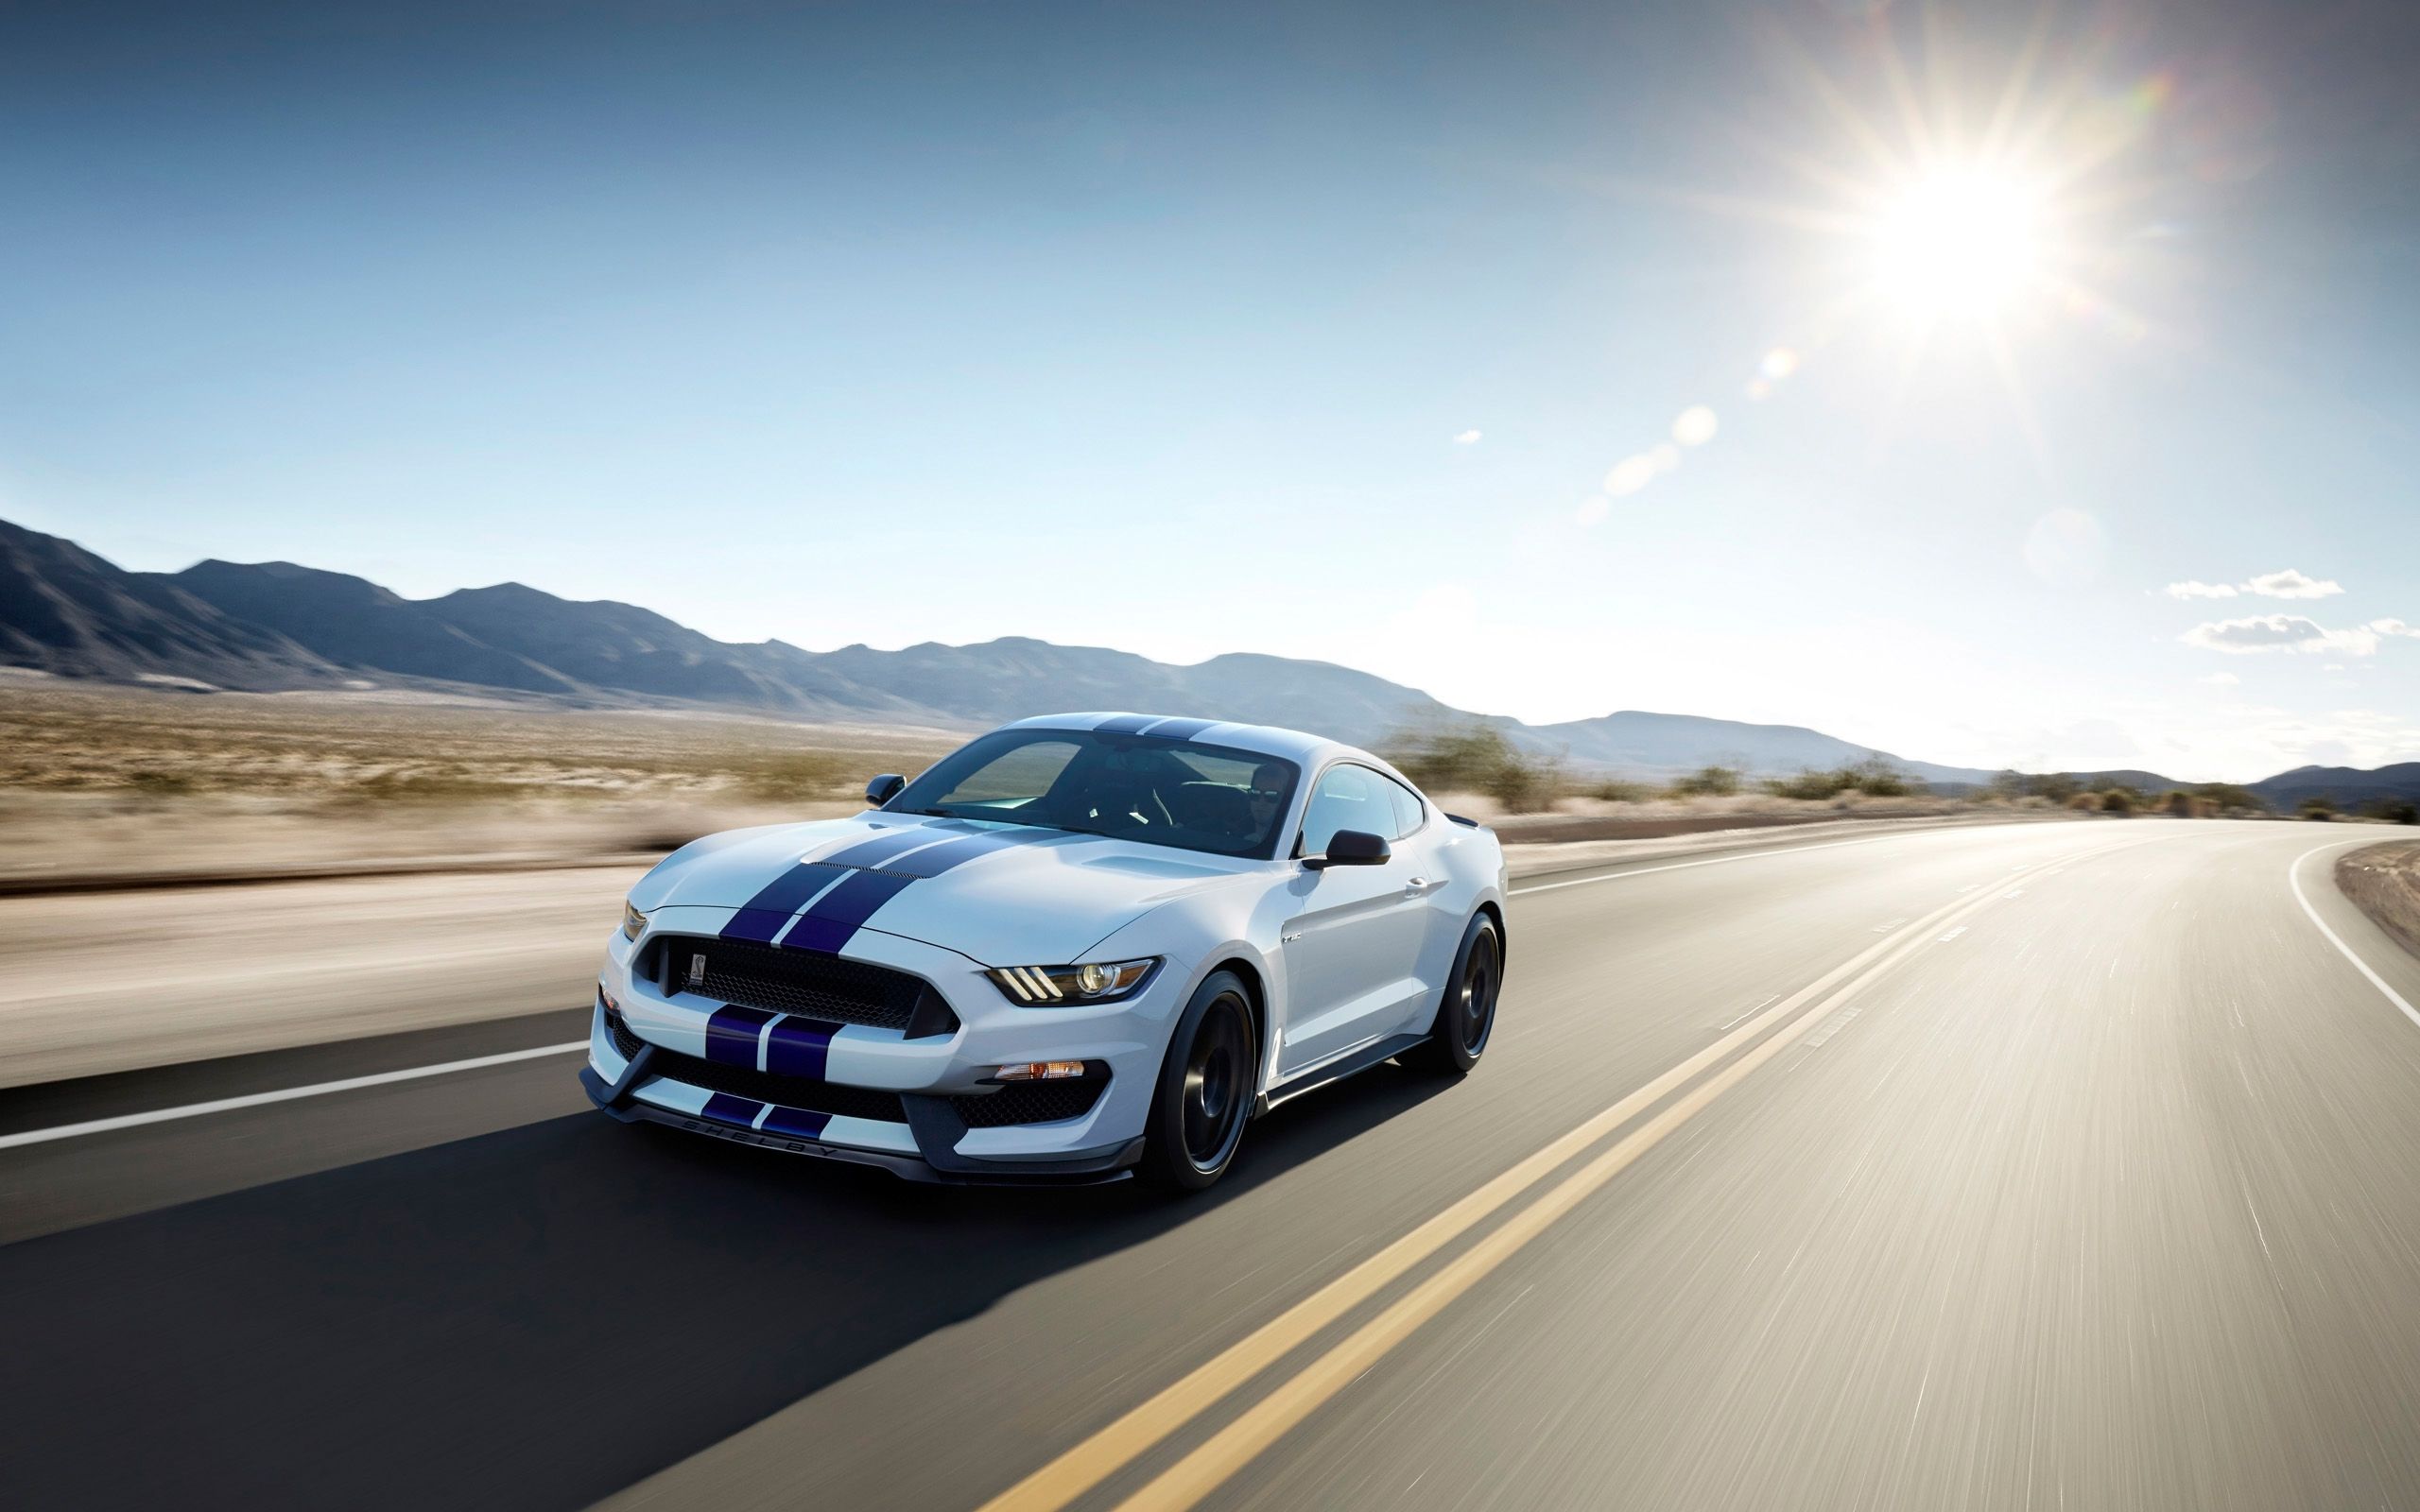 2015 Ford Shelby GT350 Mustang Wallpaper HD Car Backgrounds